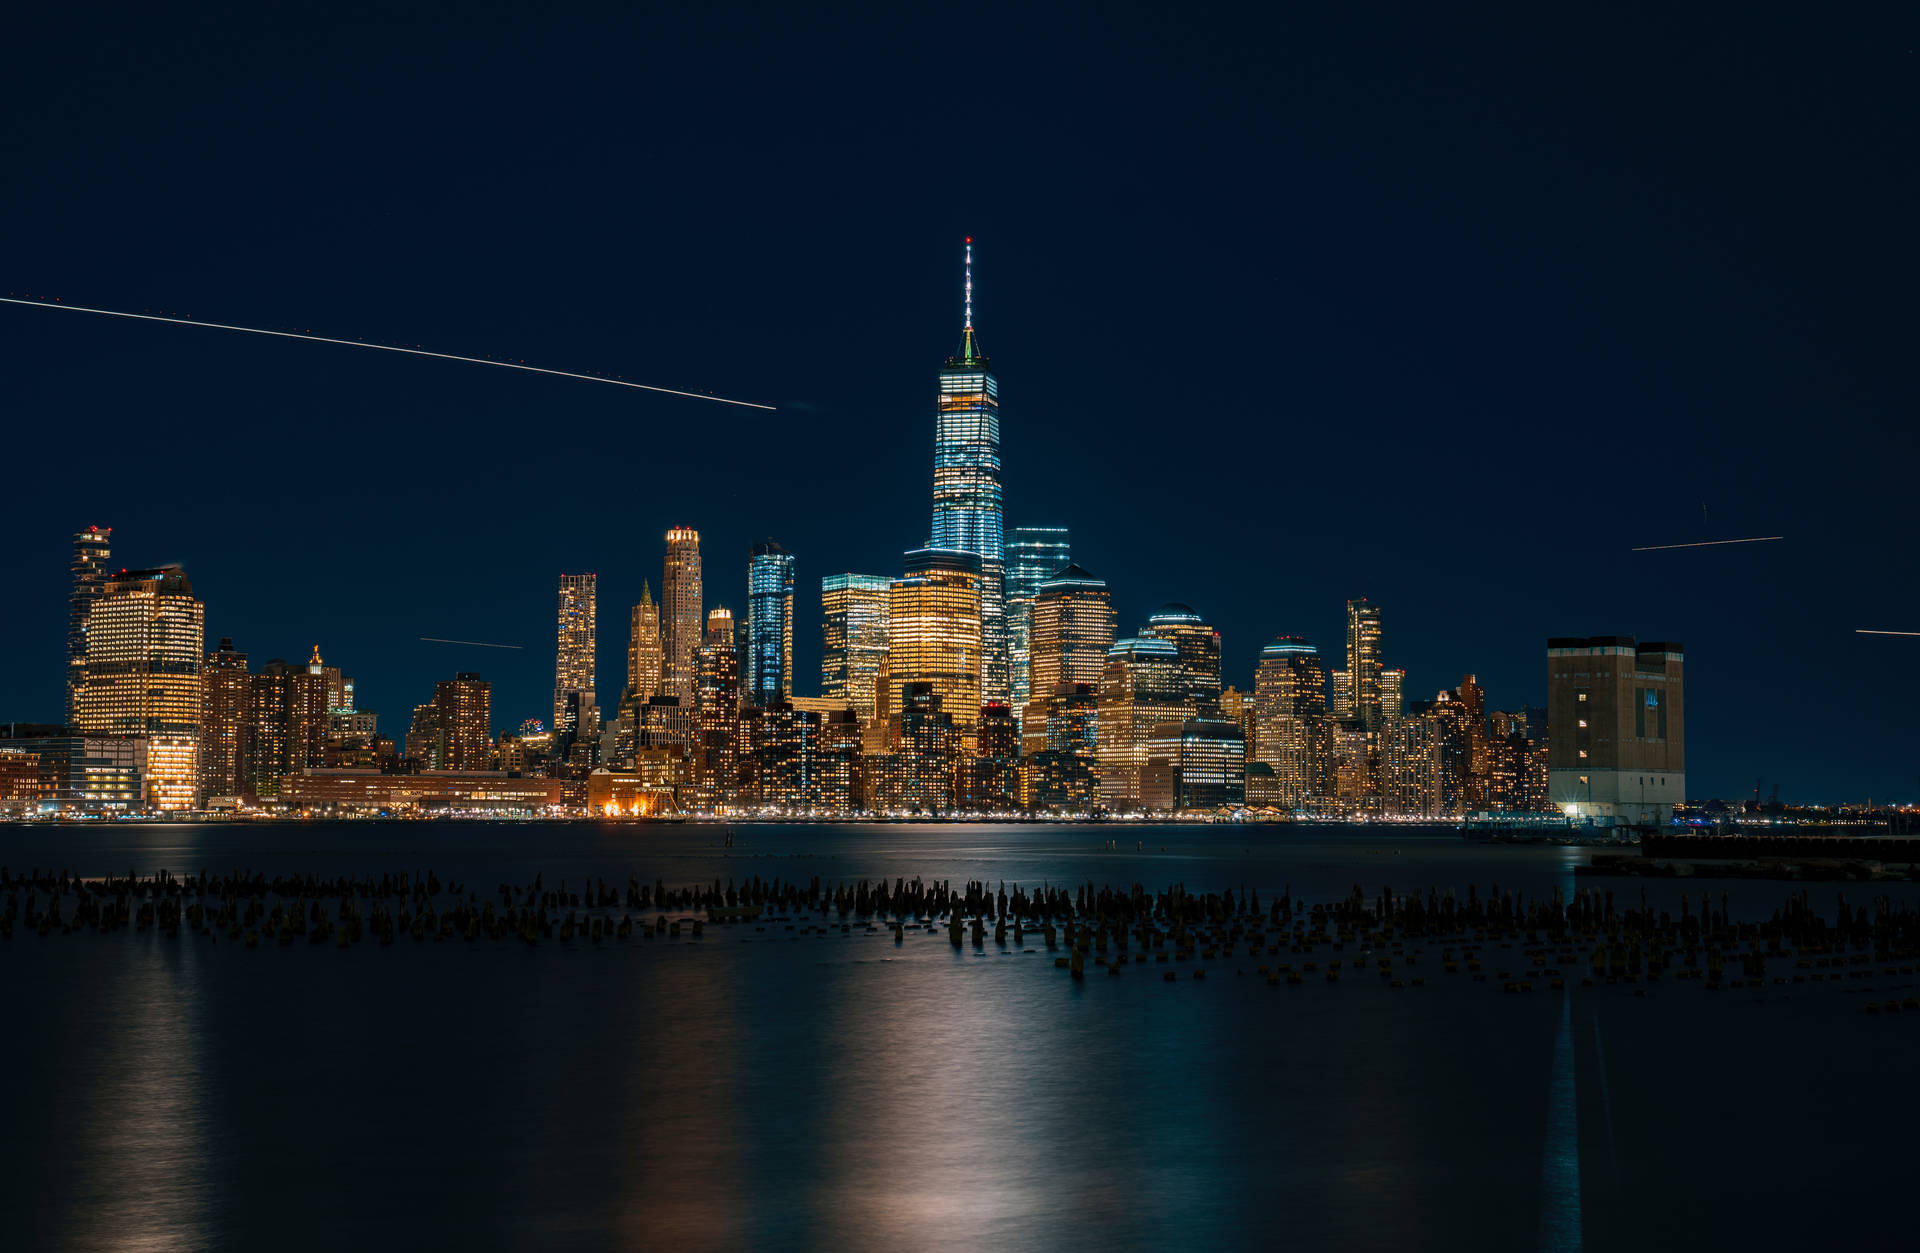 New York City 7593X4954 Wallpaper and Background Image